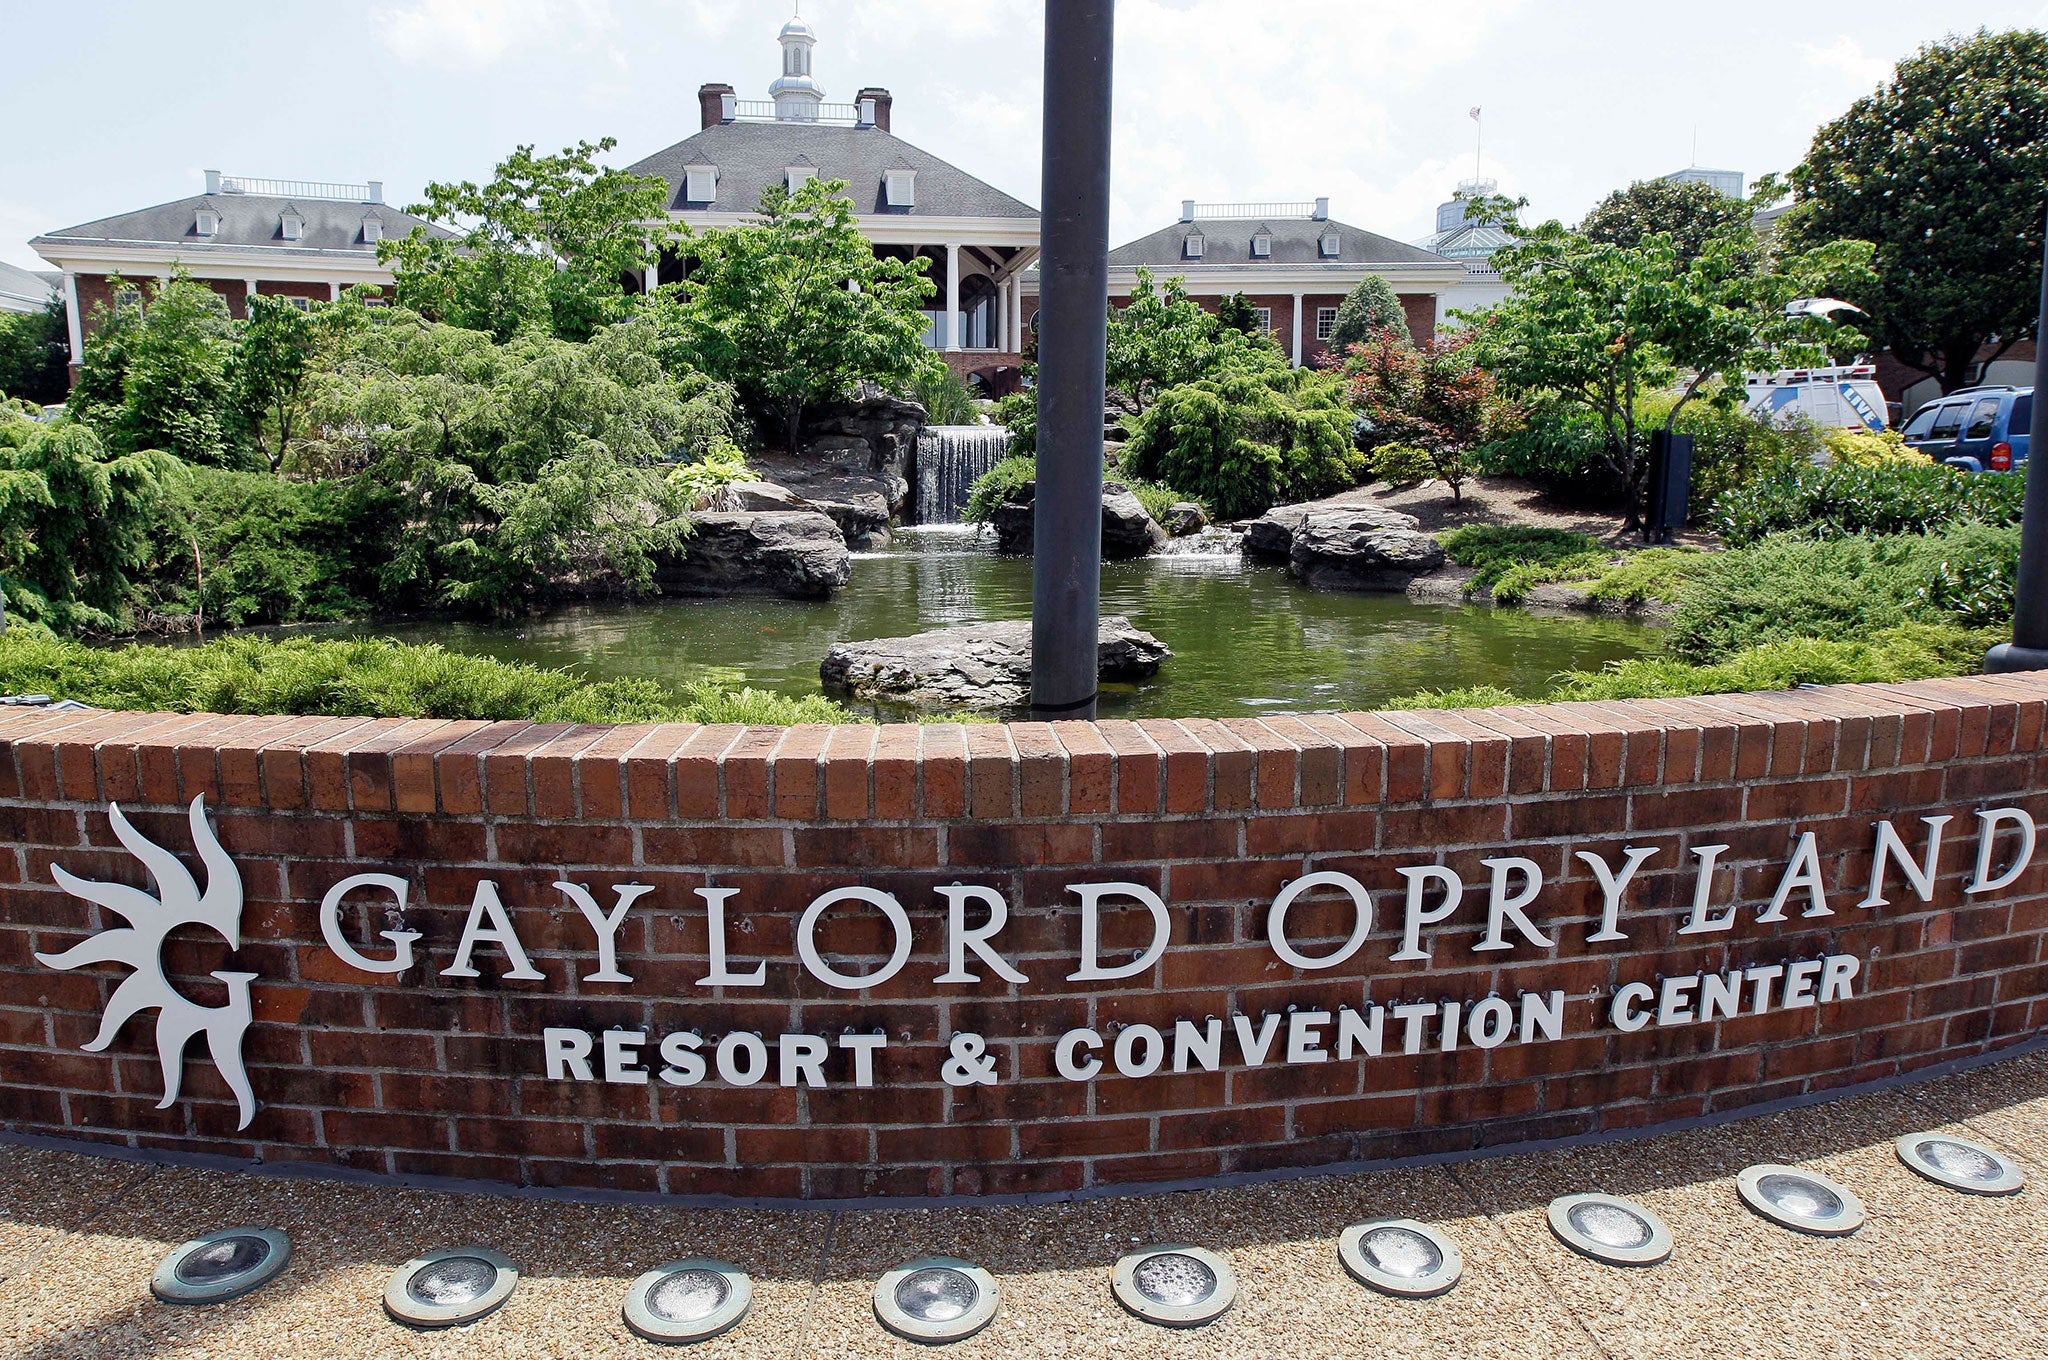 The Gaylord Opryland Resort and Convention Center in Nashville, Tennessee